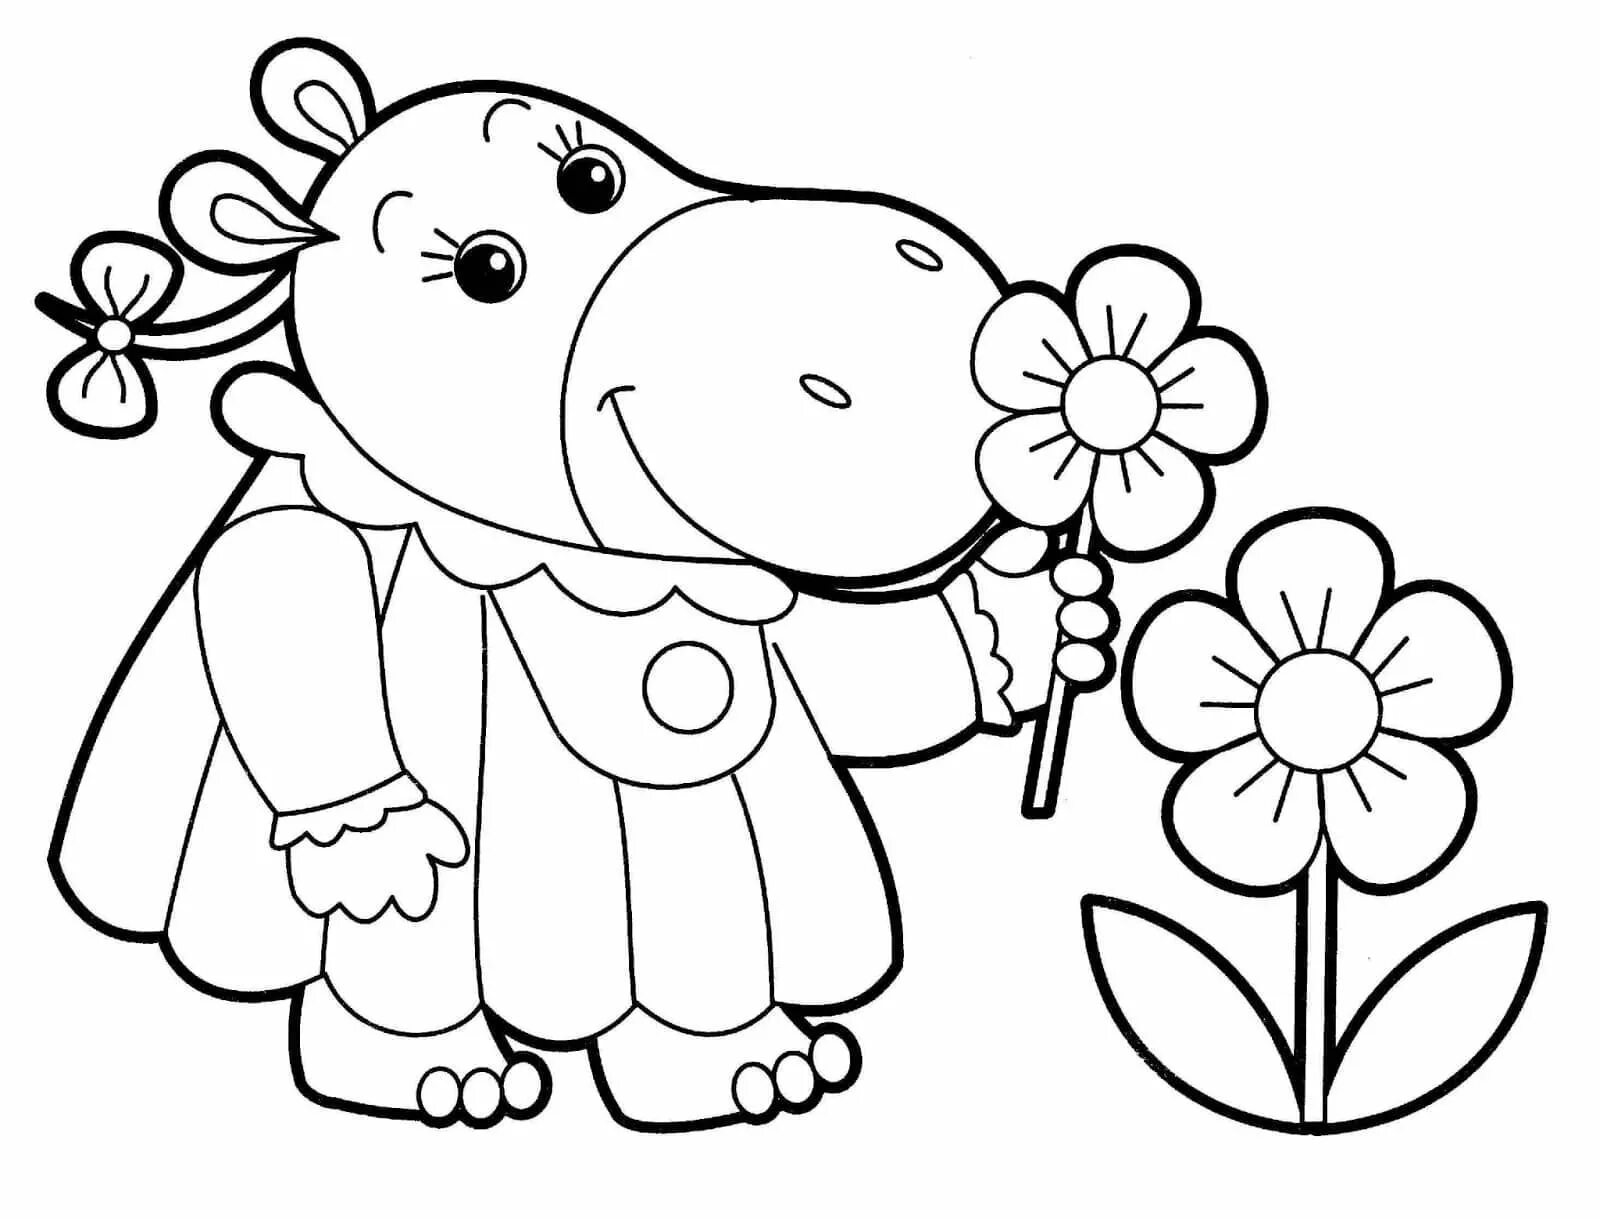 Printing coloring pages for kids #4